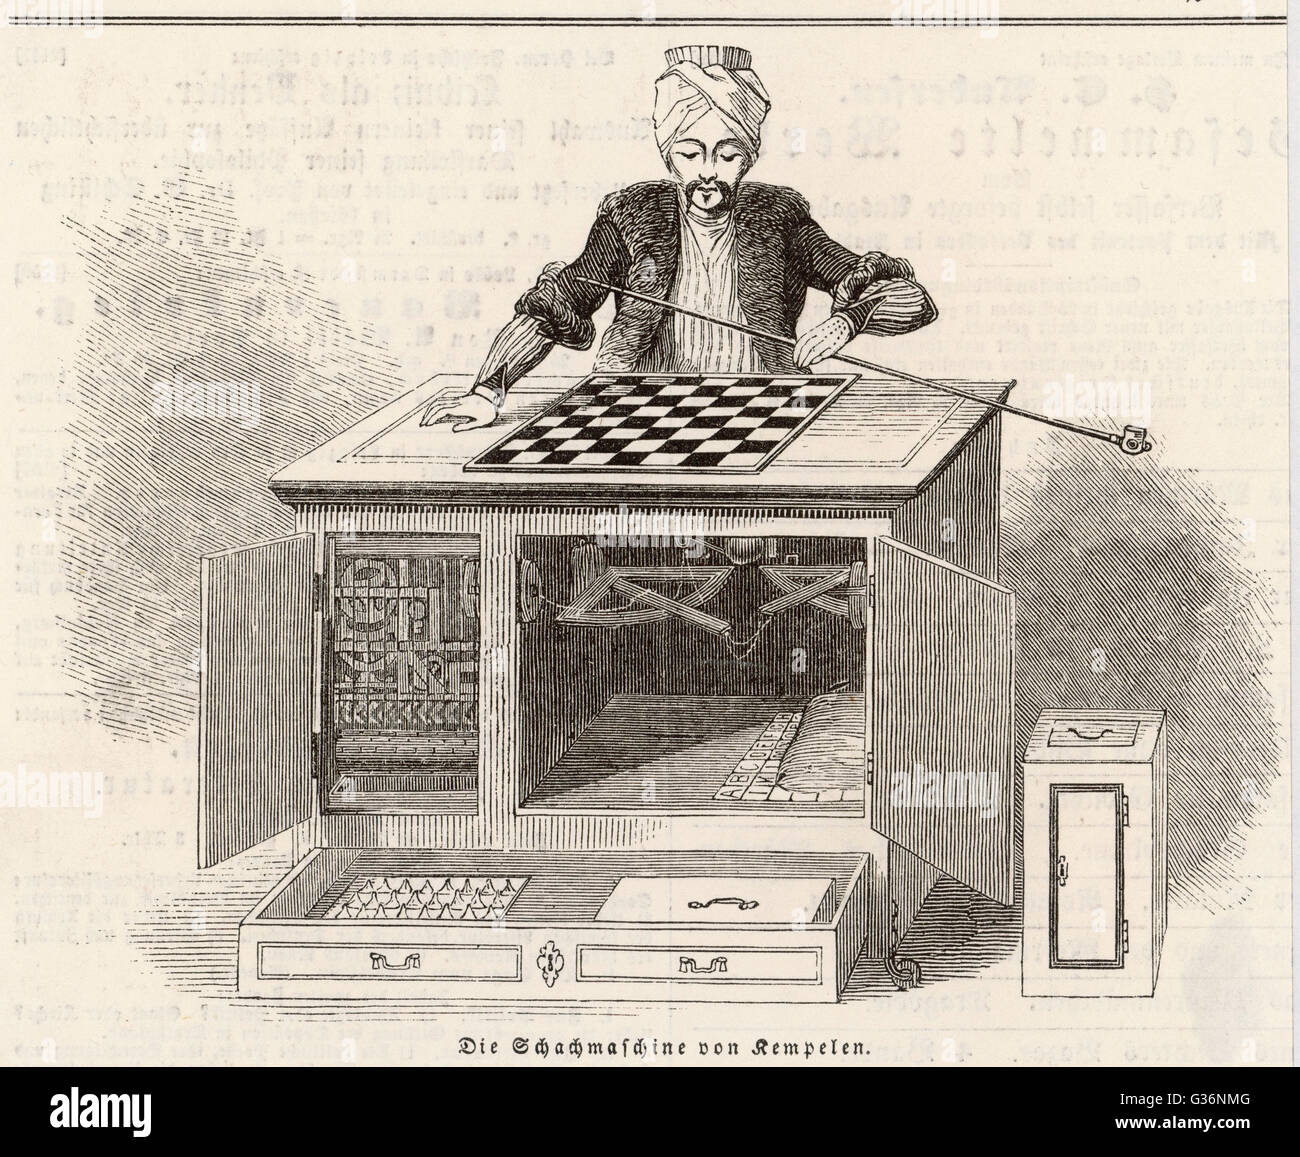 Wolfgang von Kempelin's Automaton Chess Player.  It was created in Germany, was widely exhibited, and eventually reappeared in New York in 1845.       Date: 1769 Stock Photo